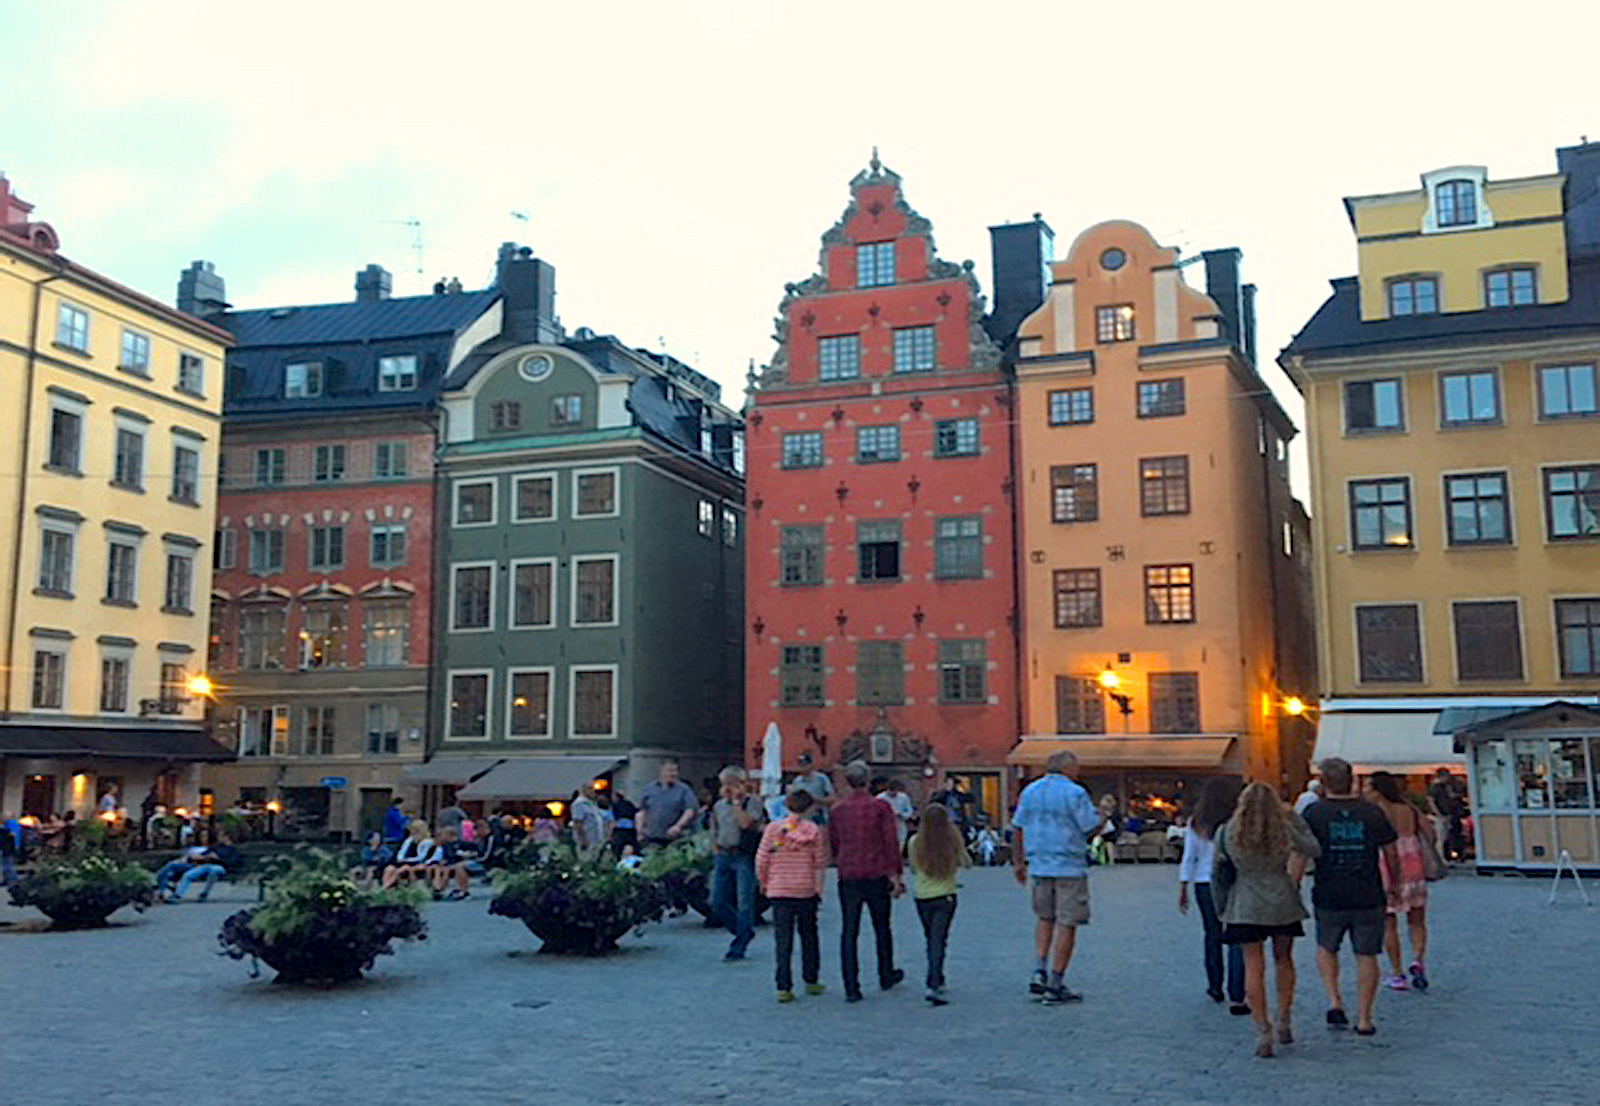 Evening Stroll through a square in Stockholm